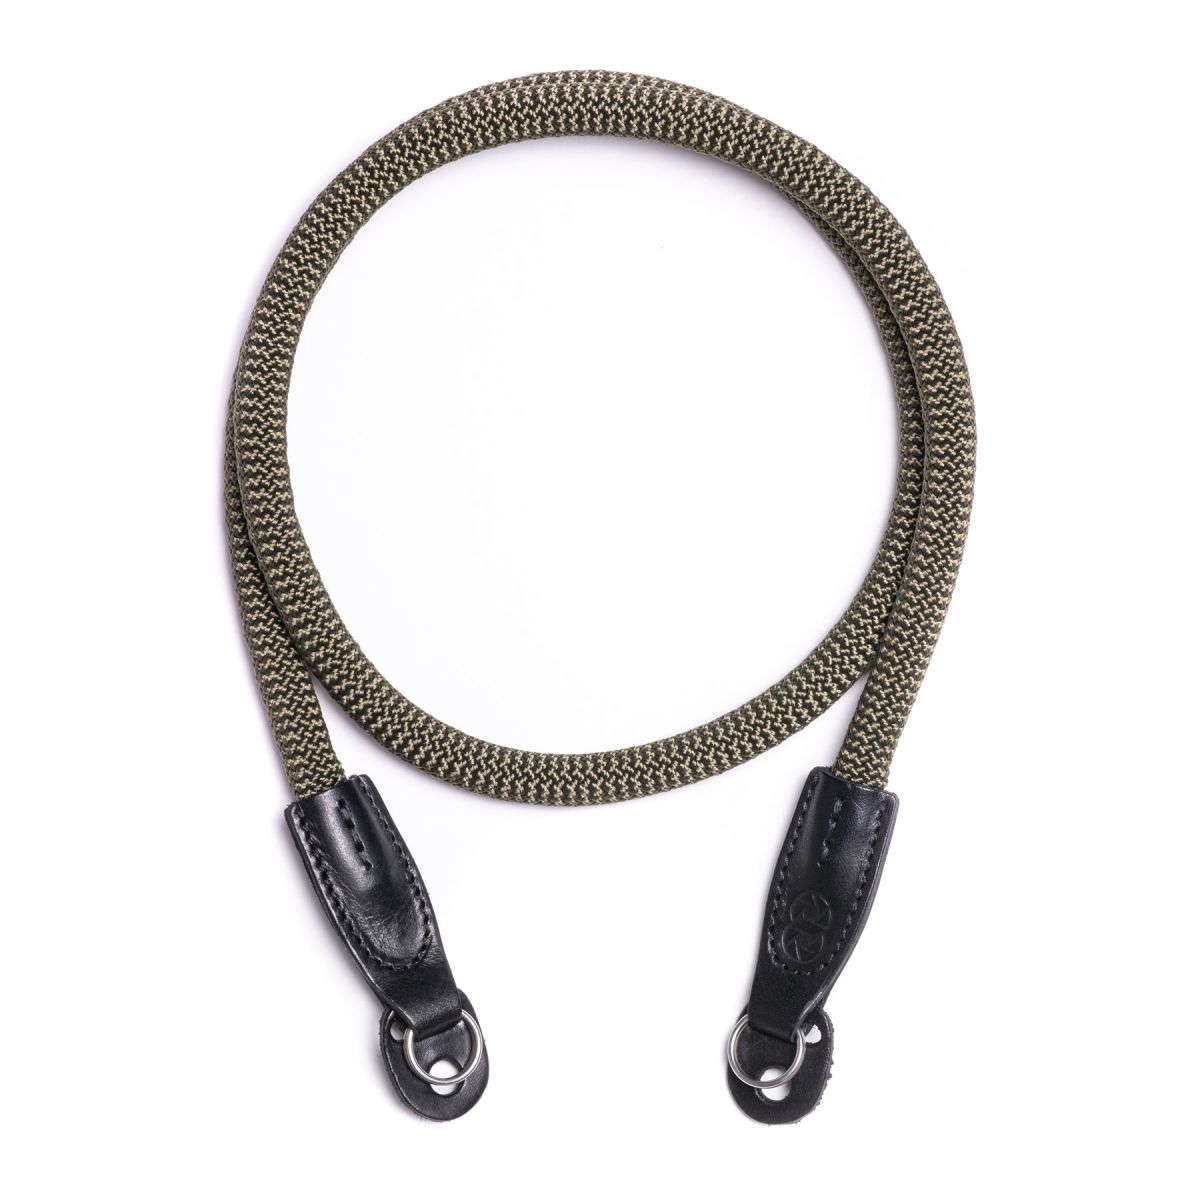 COOPH Rope Camera Strap - Army Green